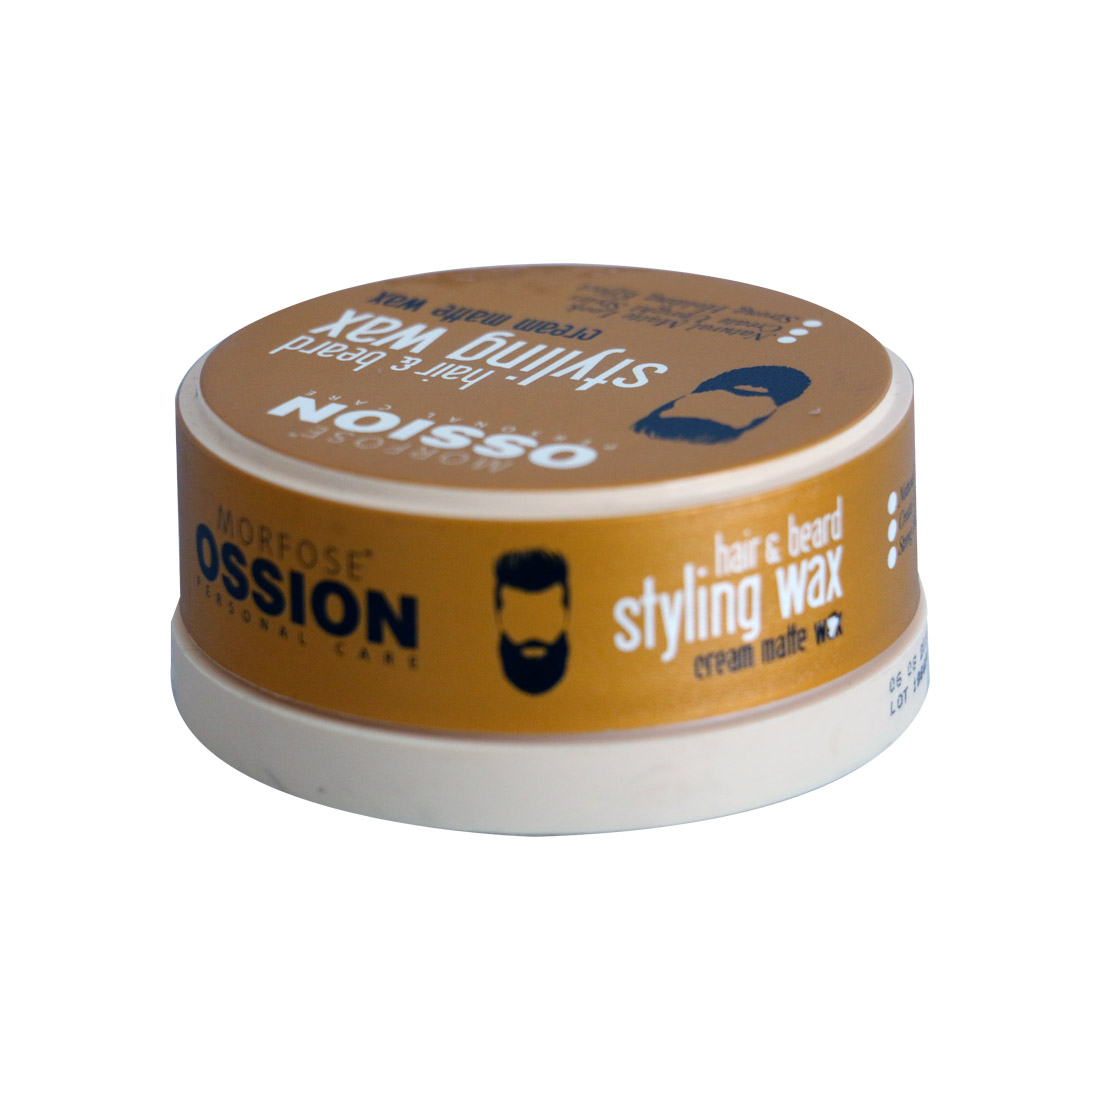 MORFOSE OSSION HAIR & BEARD STYLING WAX 150ML - Welcome To Shaversfactory-  Home of affordable barber supplies and barber tools- andis wahl oster  babyliss remington